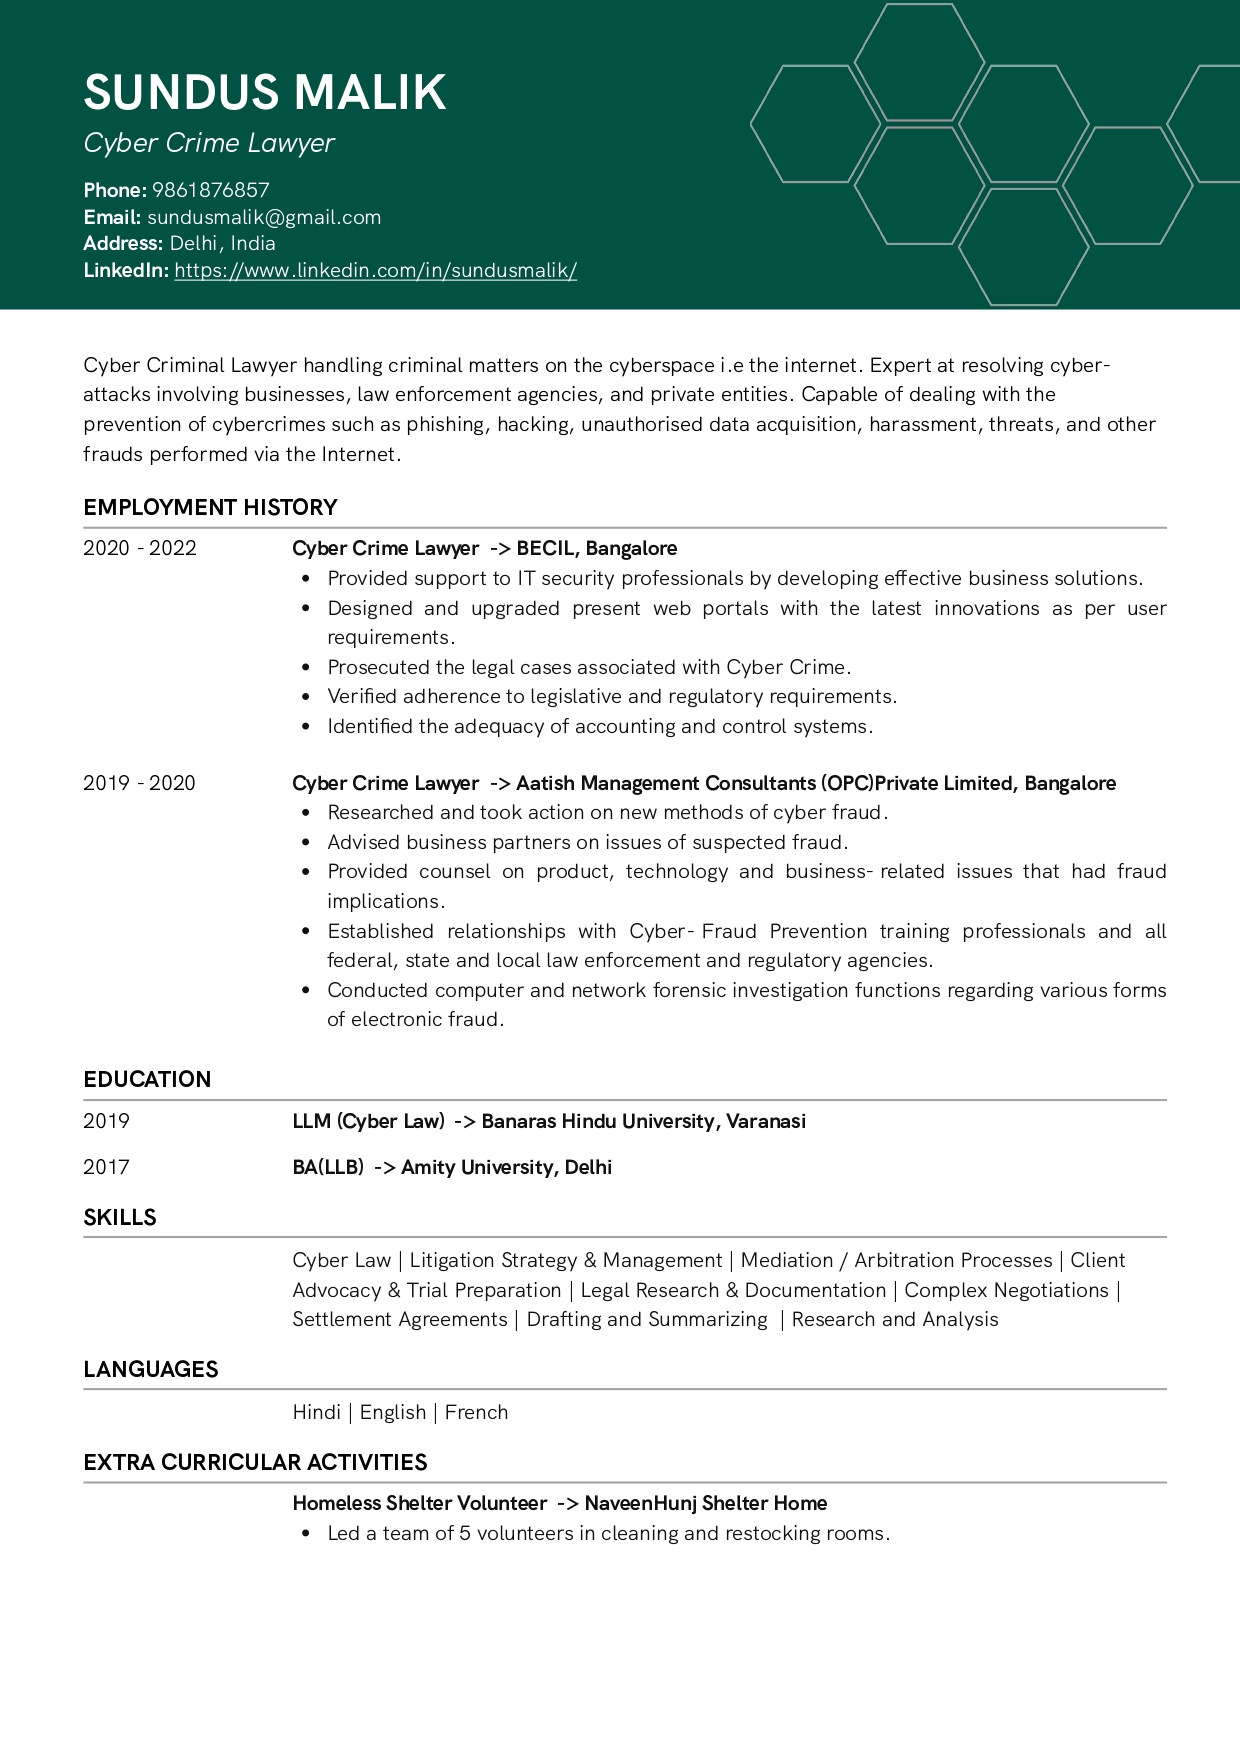 Sample Resume of Cyber Crime Lawyer | Free Resume Templates & Samples on Resumod.co